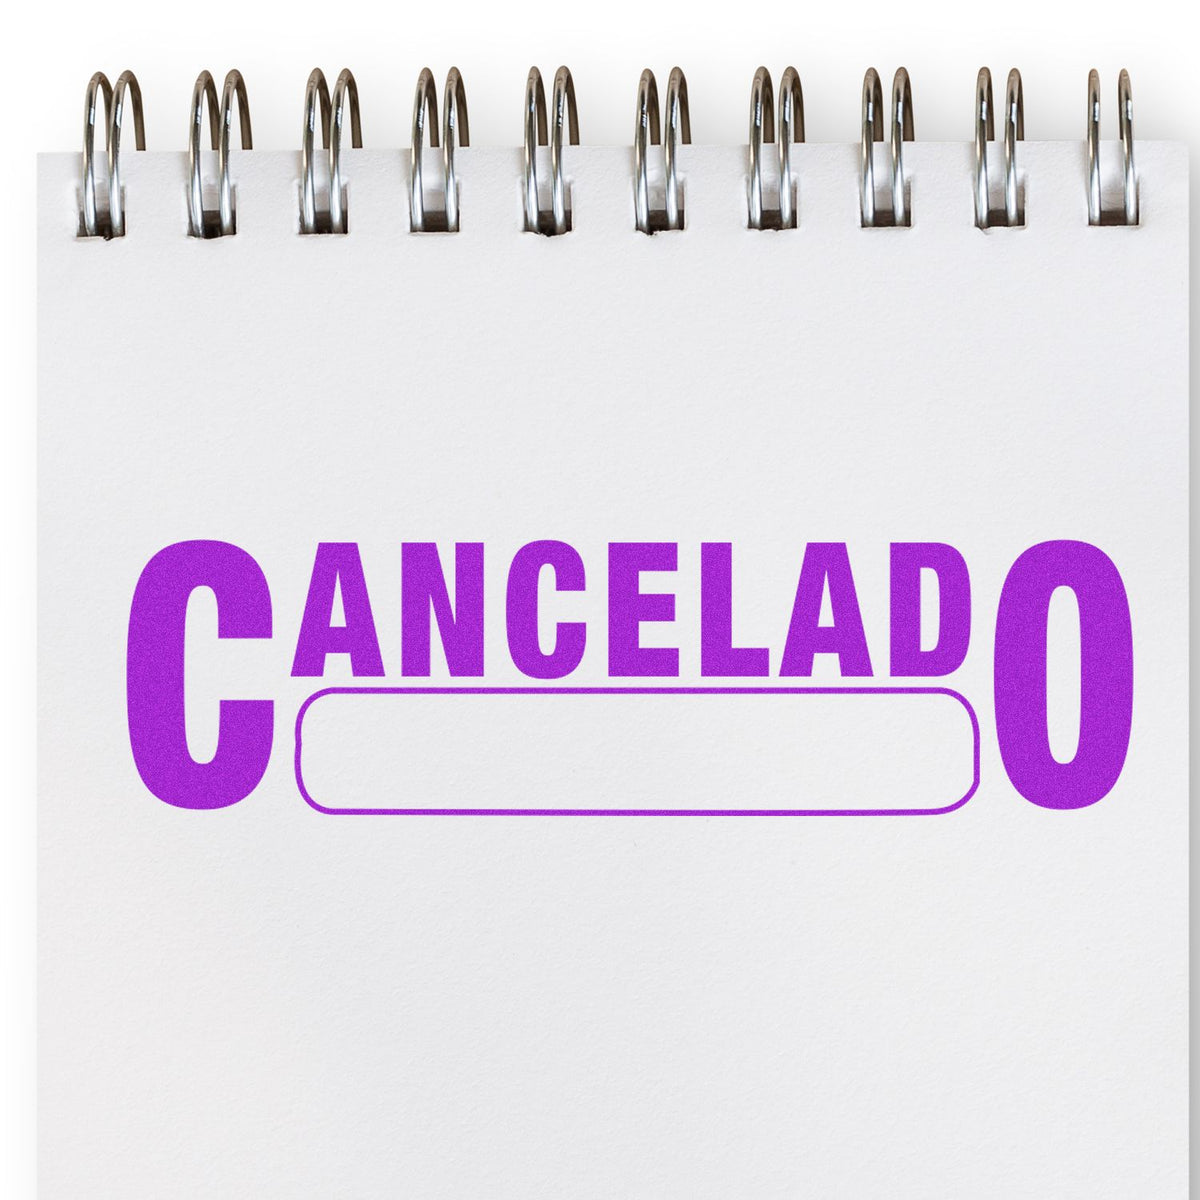 Self-Inking Cancelado with Box Stamp In Use